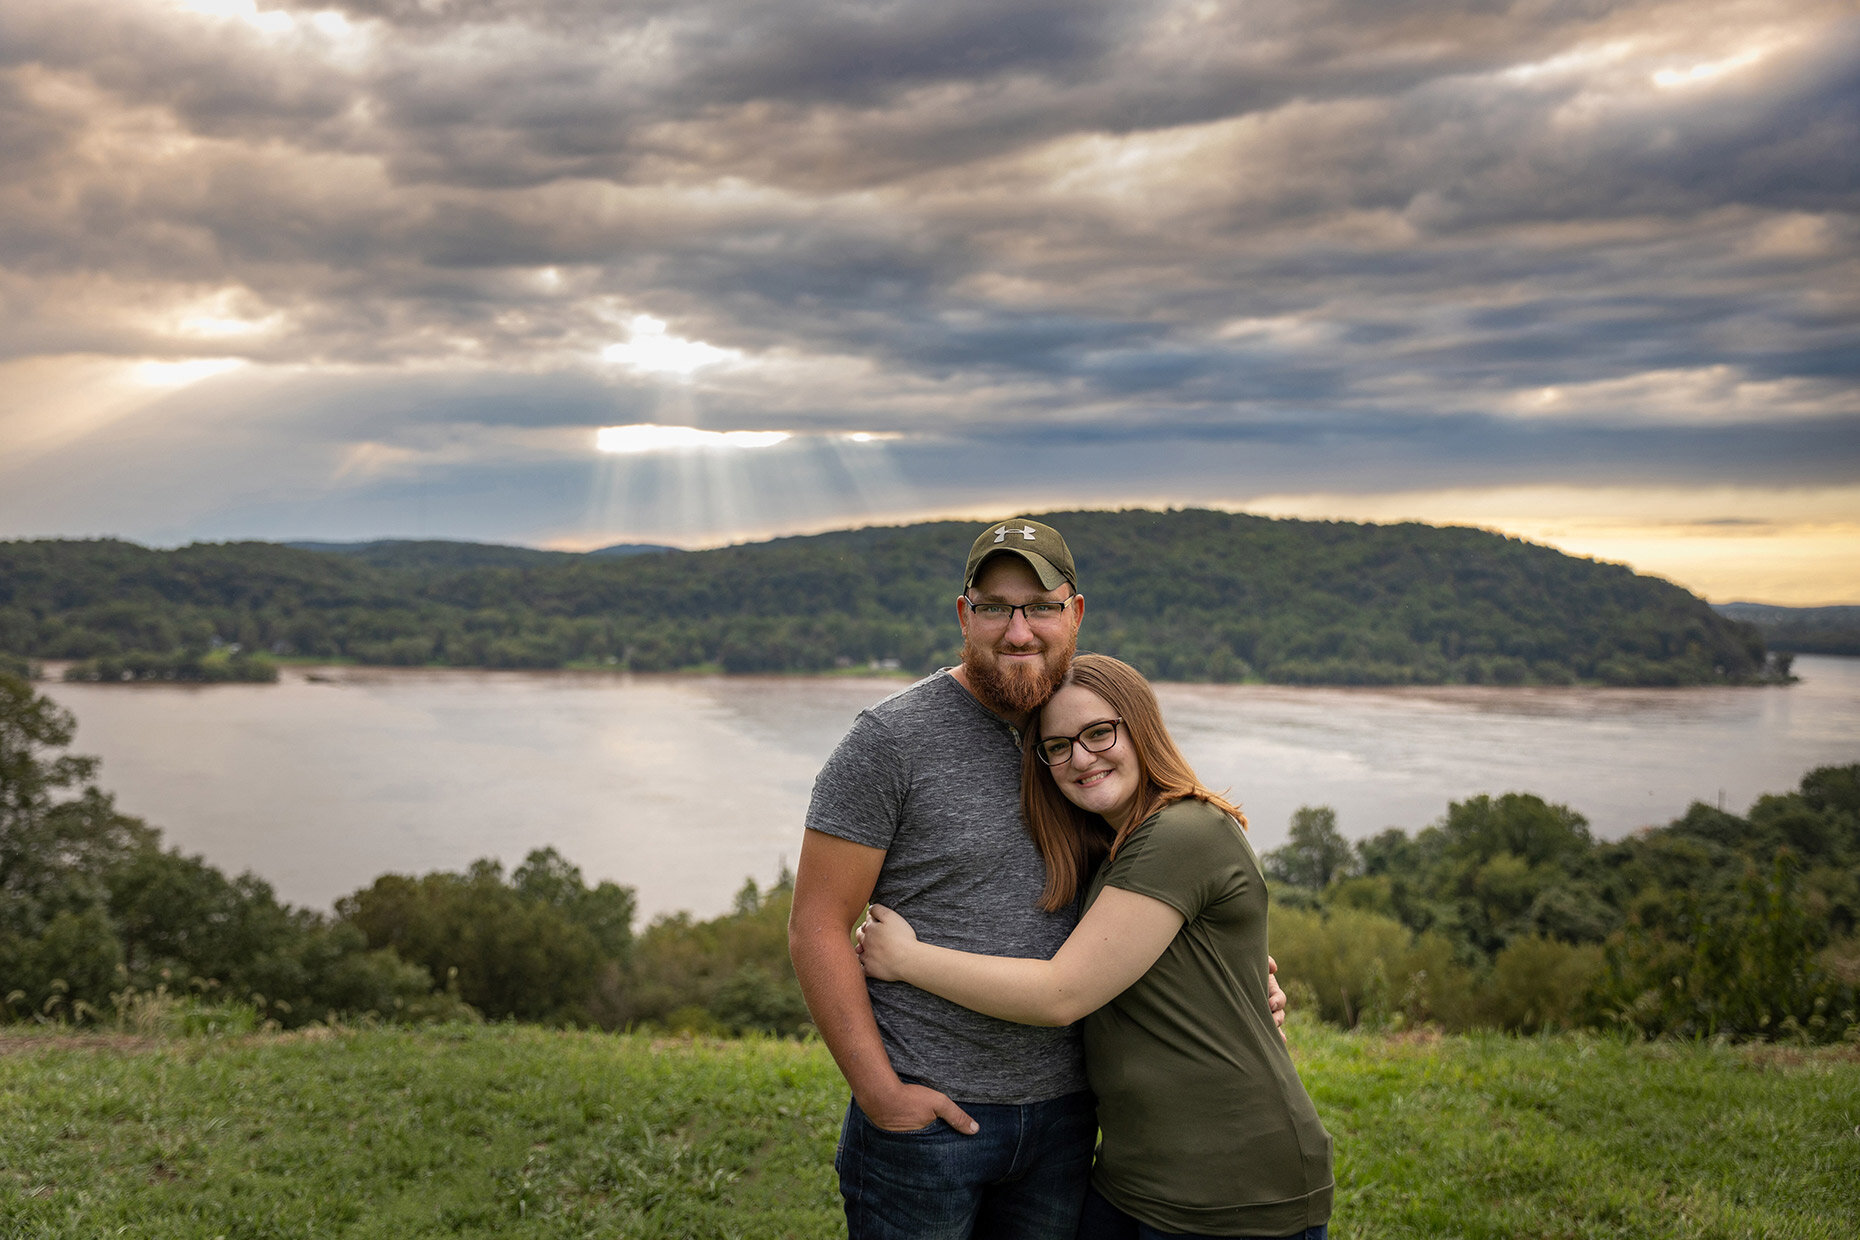 Engagement Photos in front of Susquehanna at Sunset